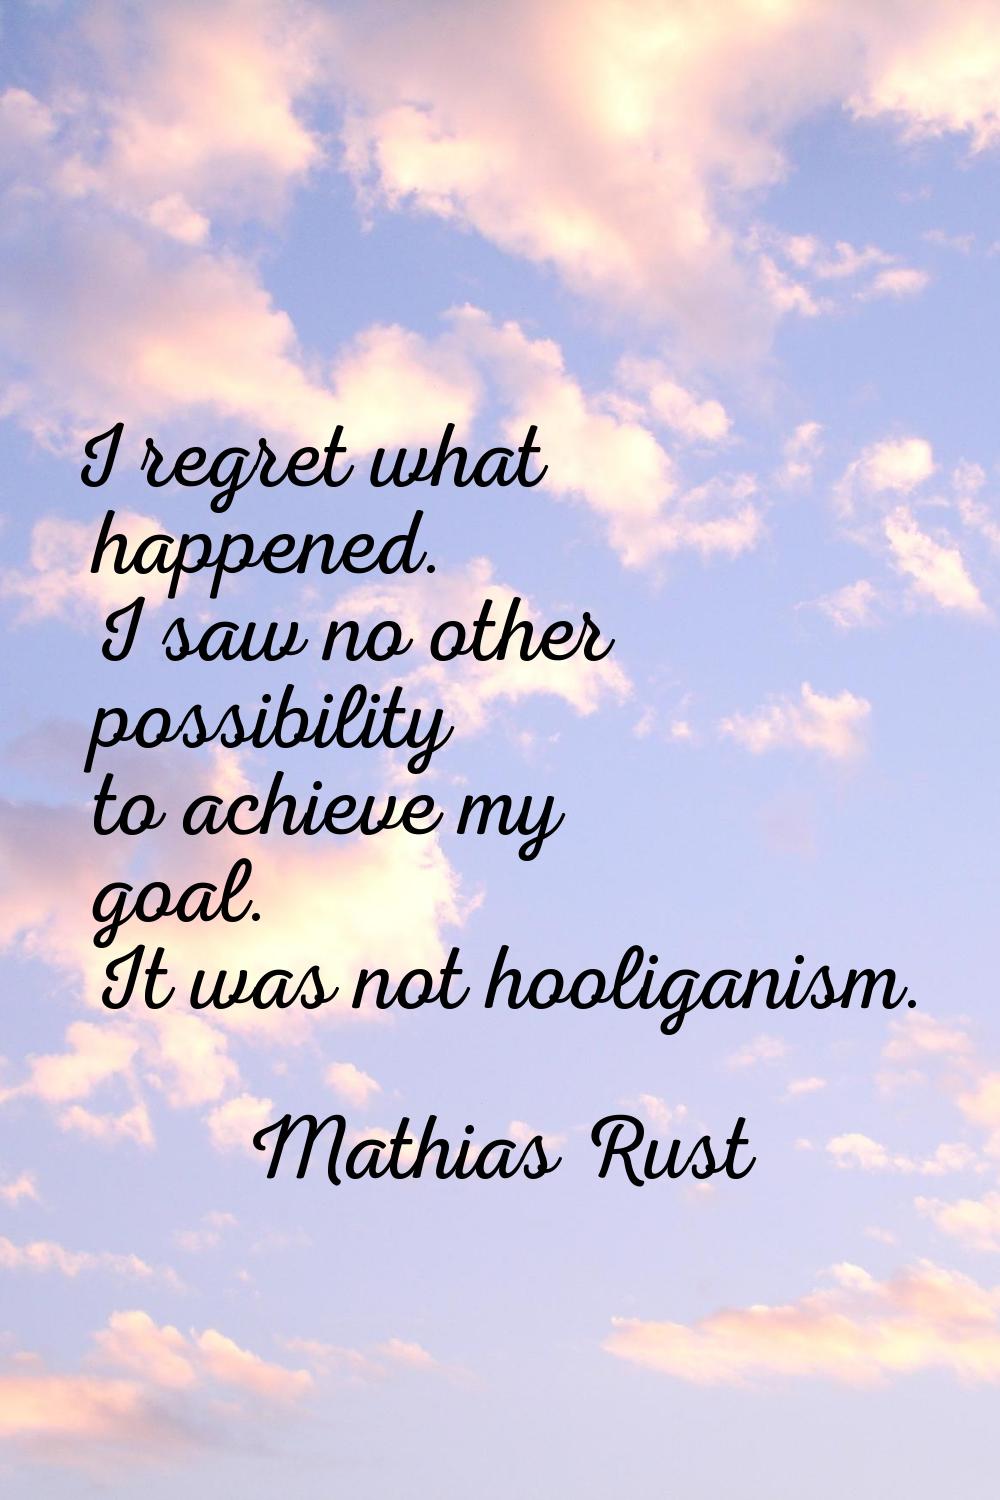 I regret what happened. I saw no other possibility to achieve my goal. It was not hooliganism.